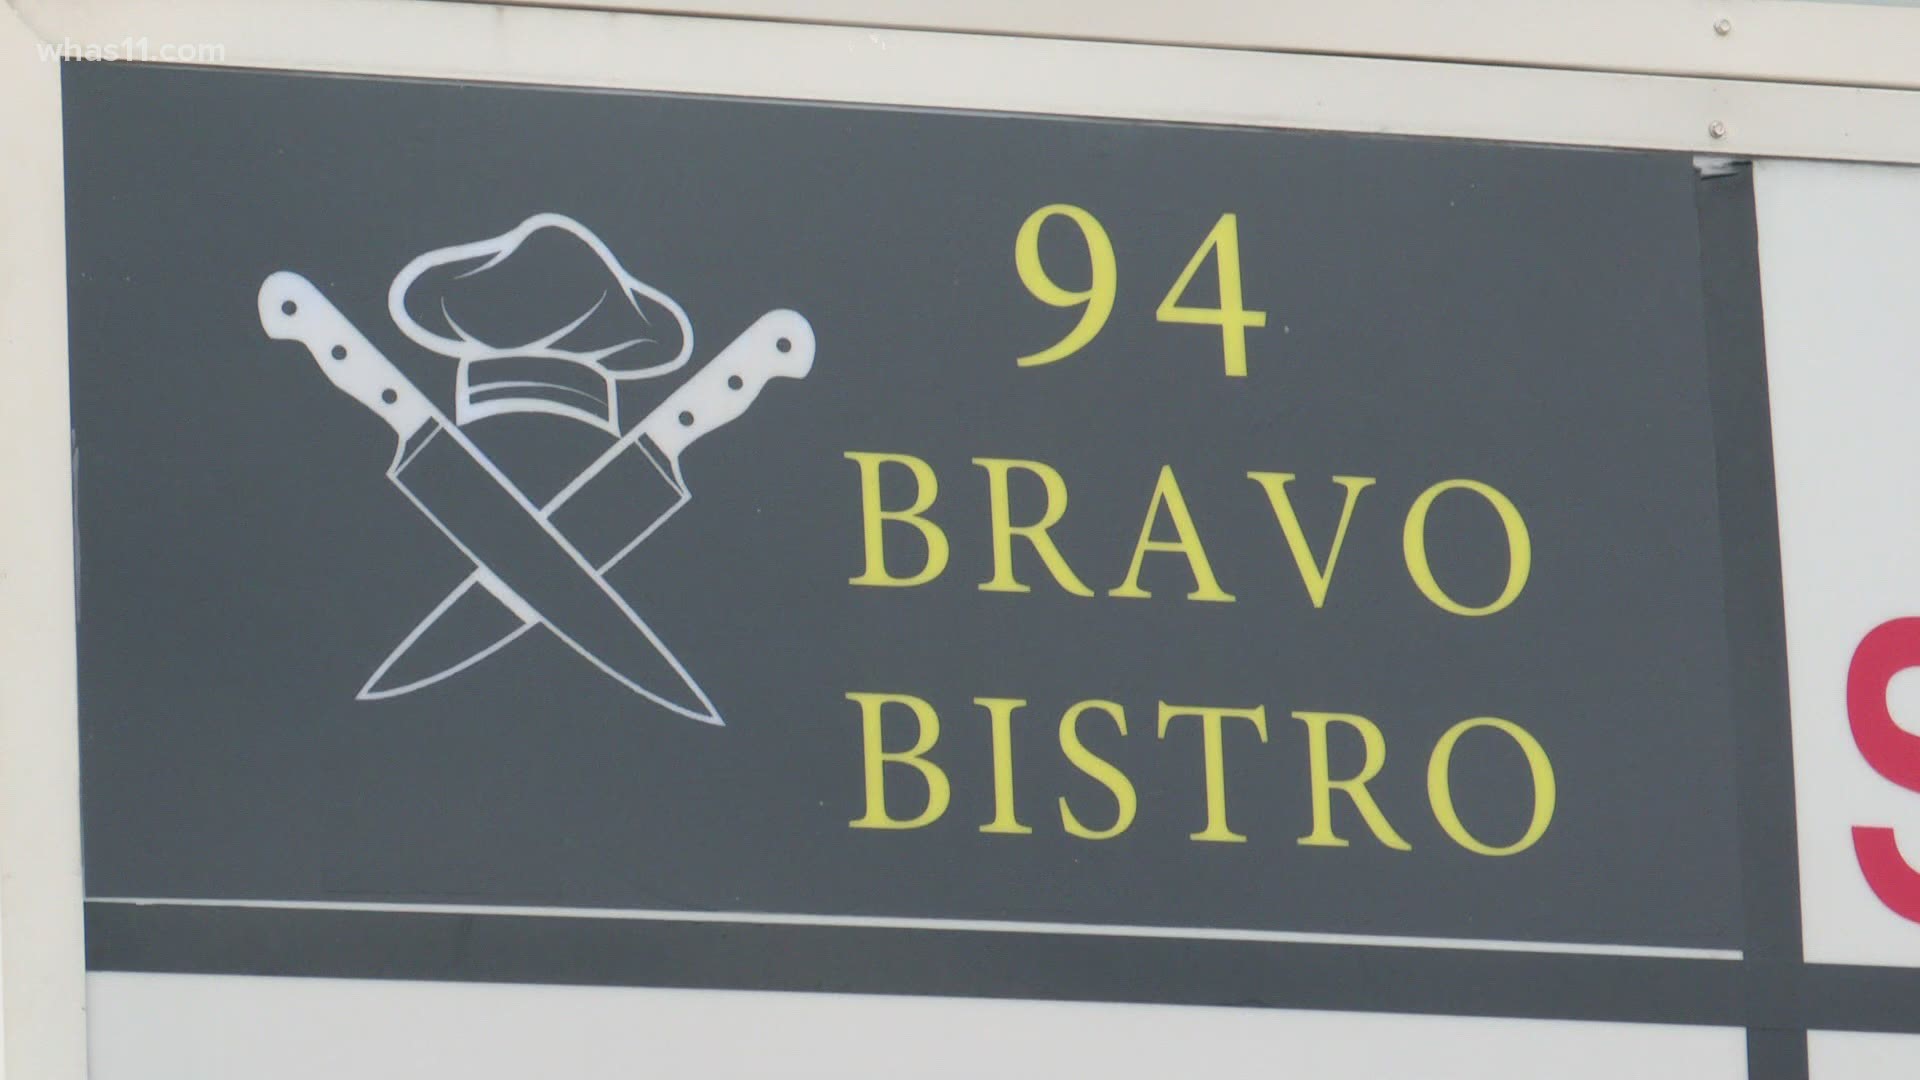 Thursday, the duo hope to hold a soft opening of 94 Bravo Bistro located at 2410 Ring Road in Elizabethtown.